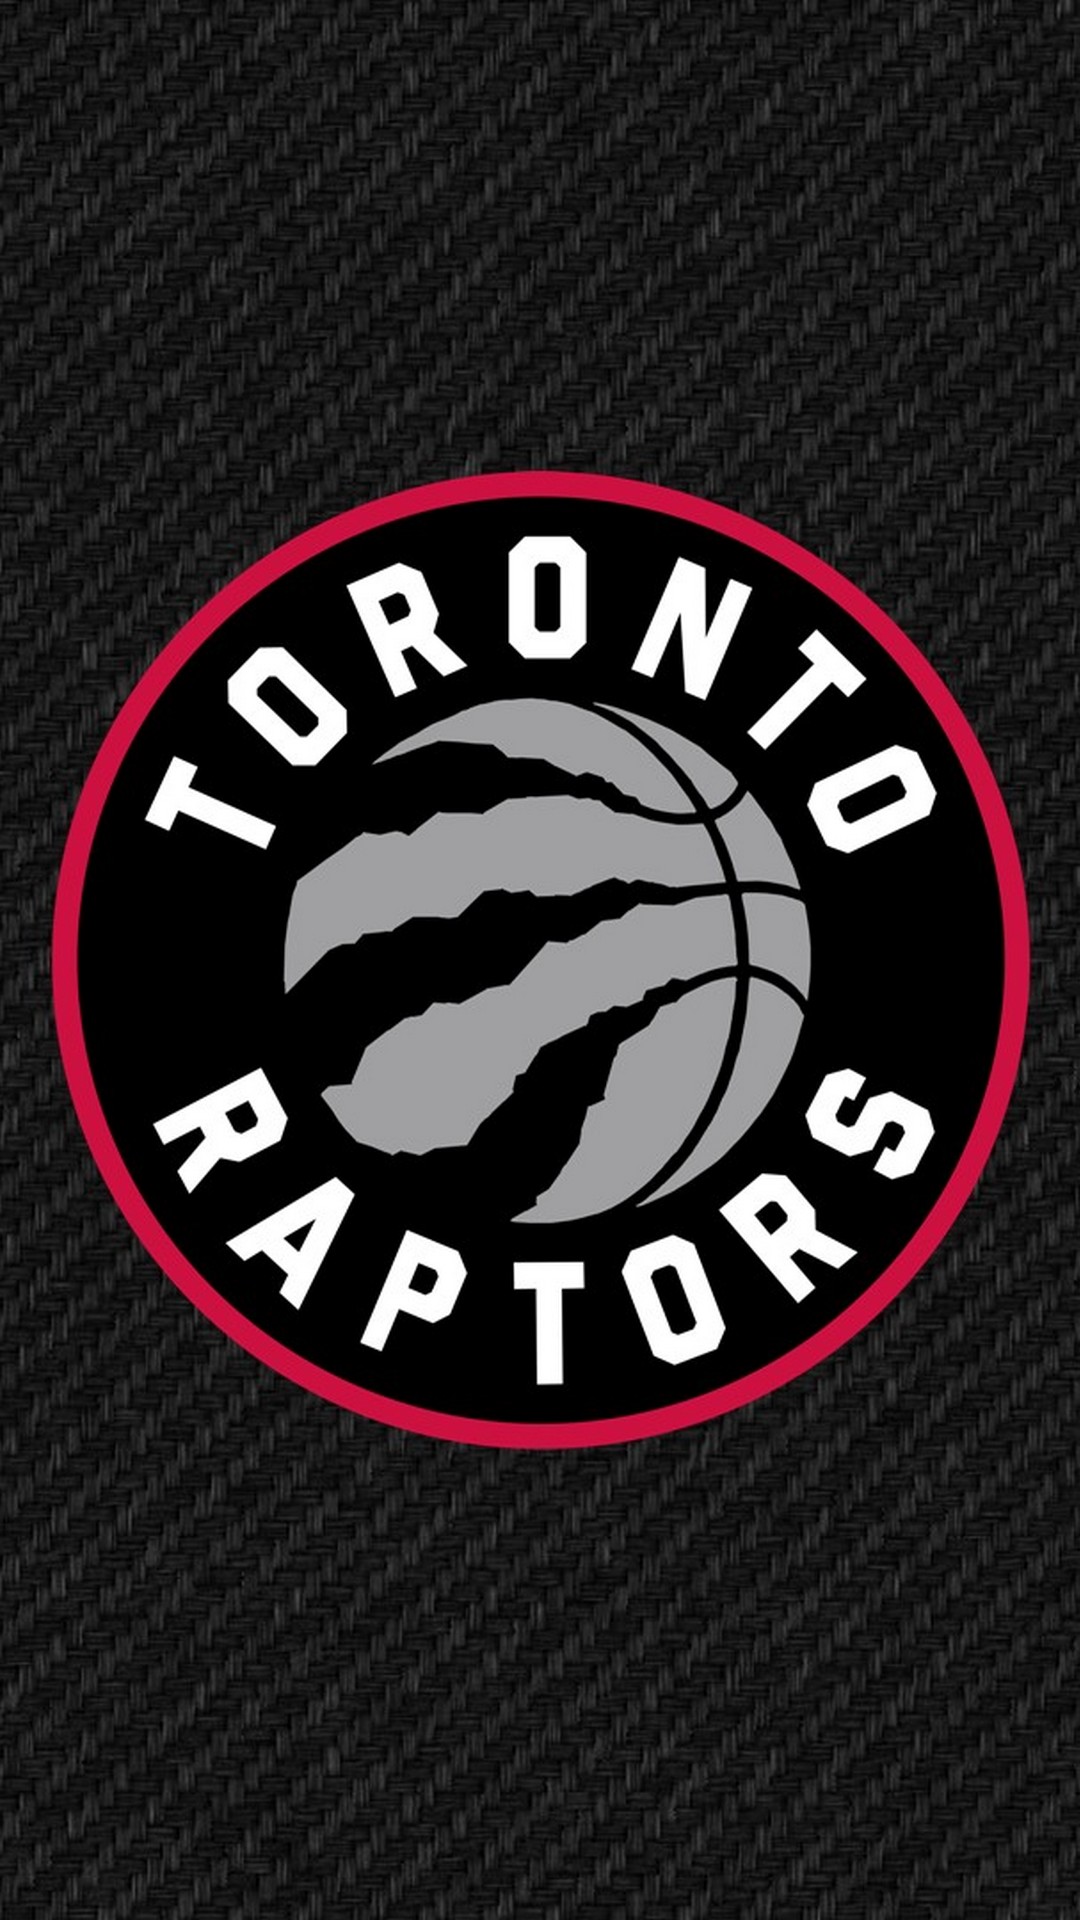 Toronto Raptors Backgrounds For Android with resolution 1080X1920 pixel. You can make this wallpaper for your Android backgrounds, Tablet, Smartphones Screensavers and Mobile Phone Lock Screen